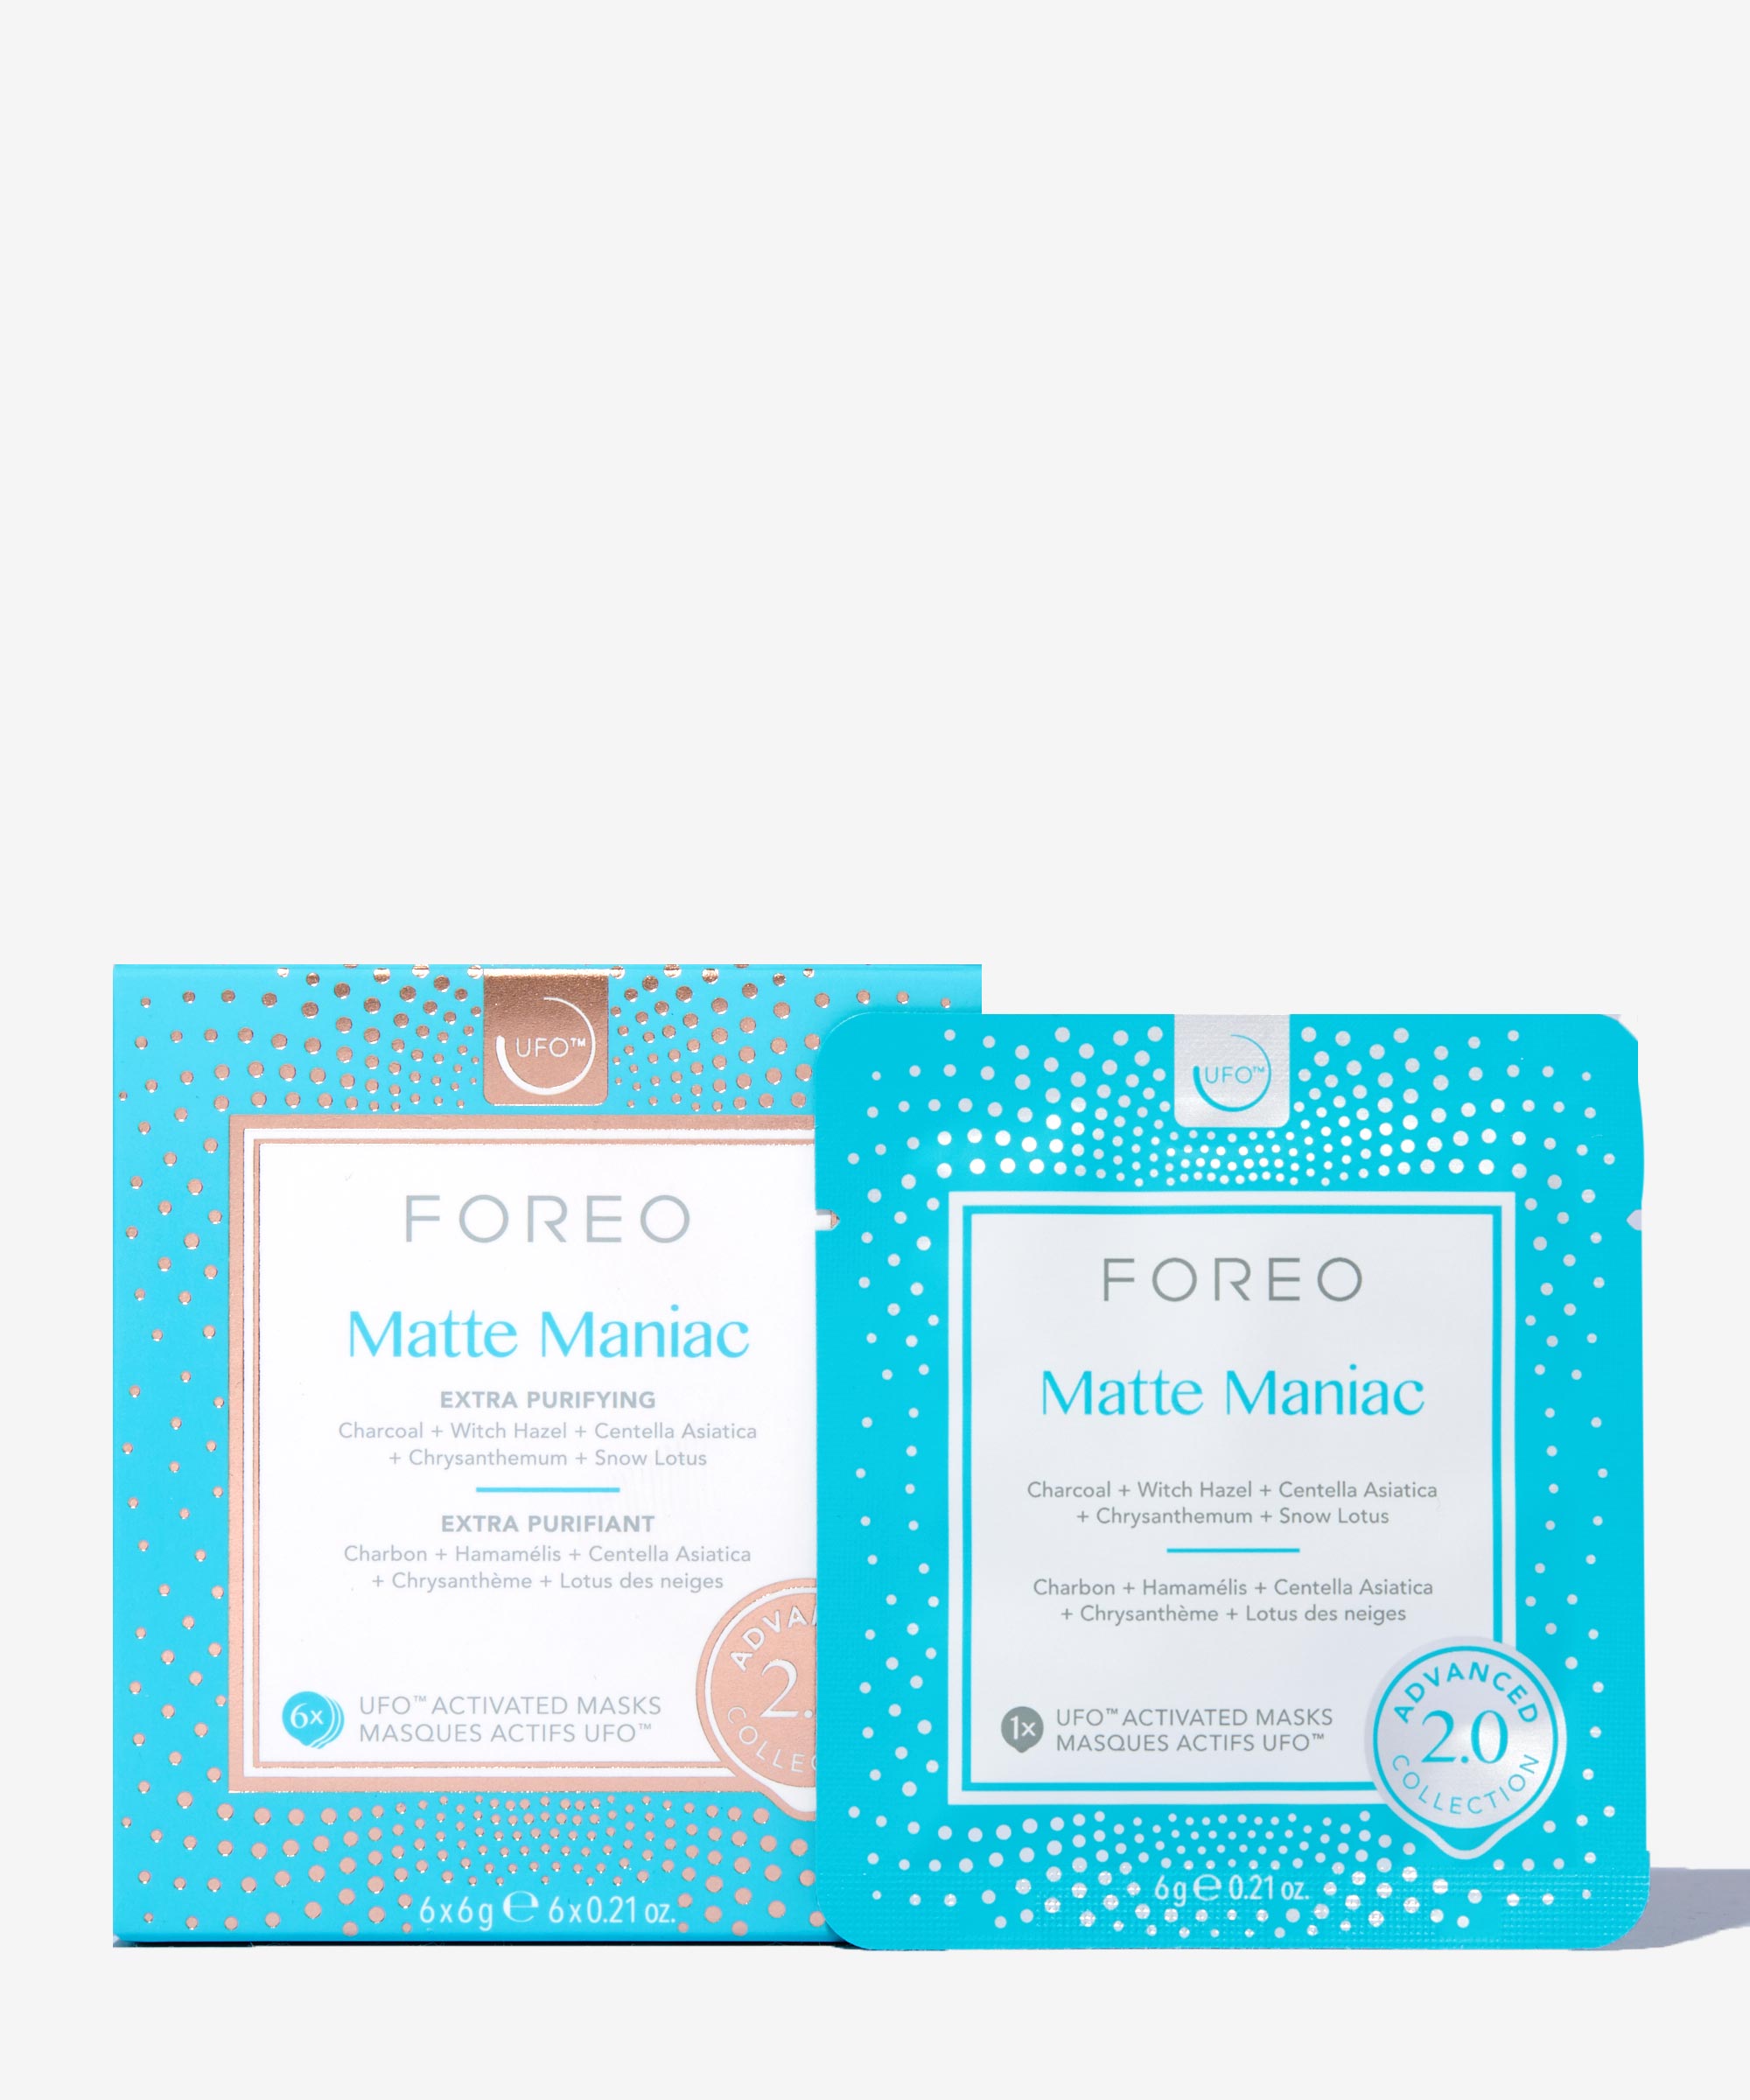 Purifying UFO-Activated Matte Maniac at BAY 2.0 Mask BEAUTY Foreo